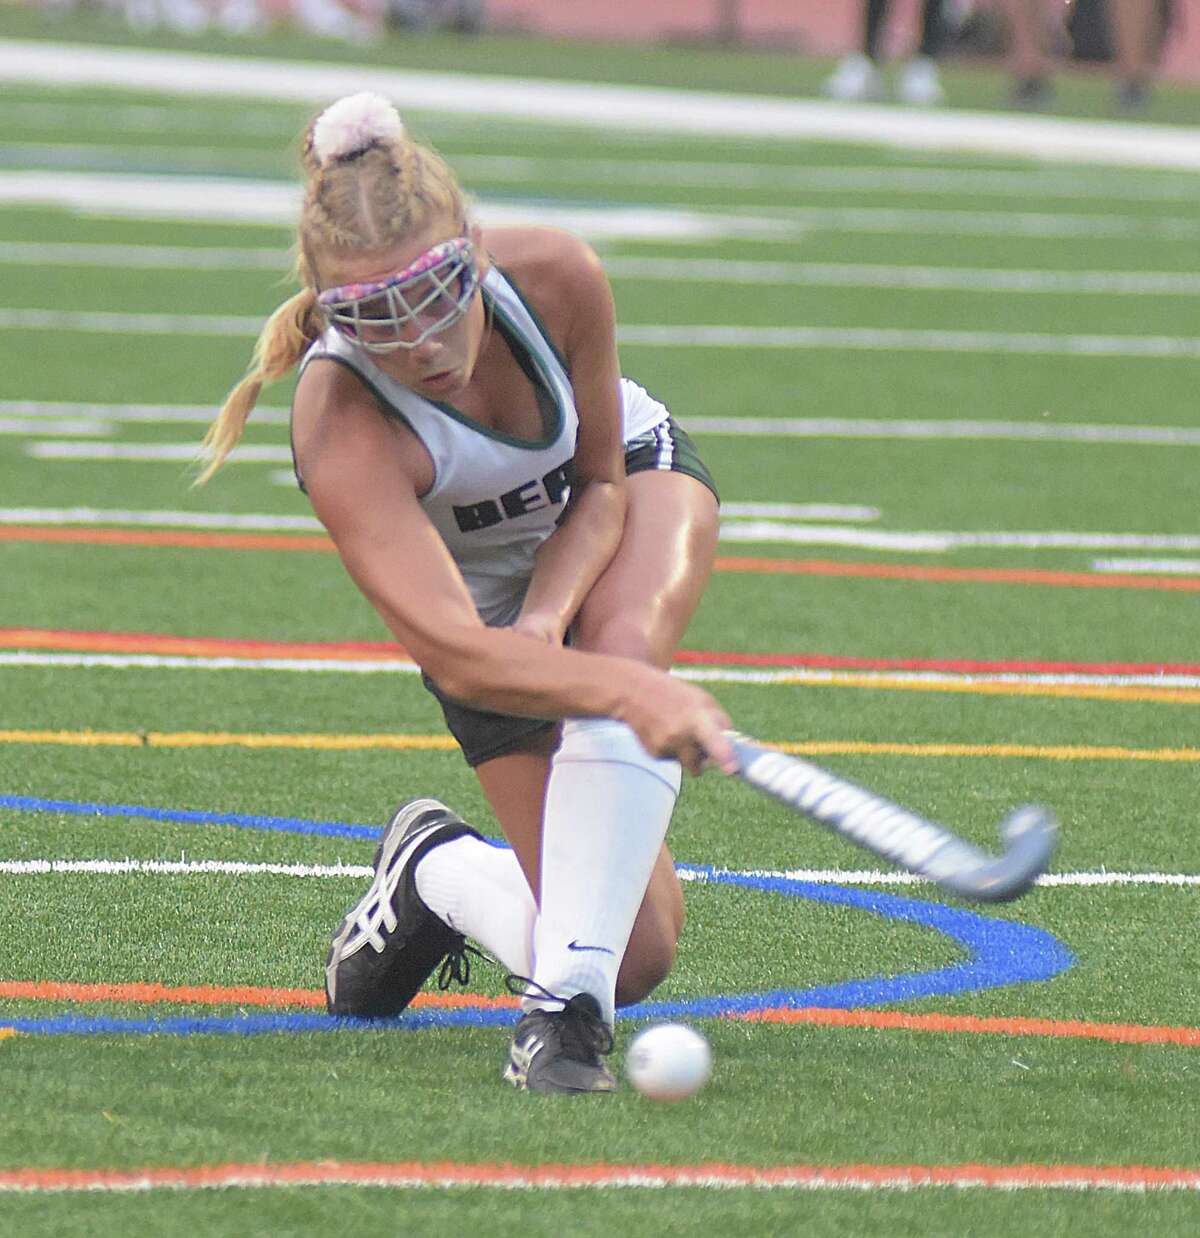 Norwalk’s Tessa Albrecht rips off a penalty stroke for her second goal of the game against Wilton during Tuesday’s FCIAC field hockey game at Testa Field in Norwalk. Wilton held on for a 6-5 win.